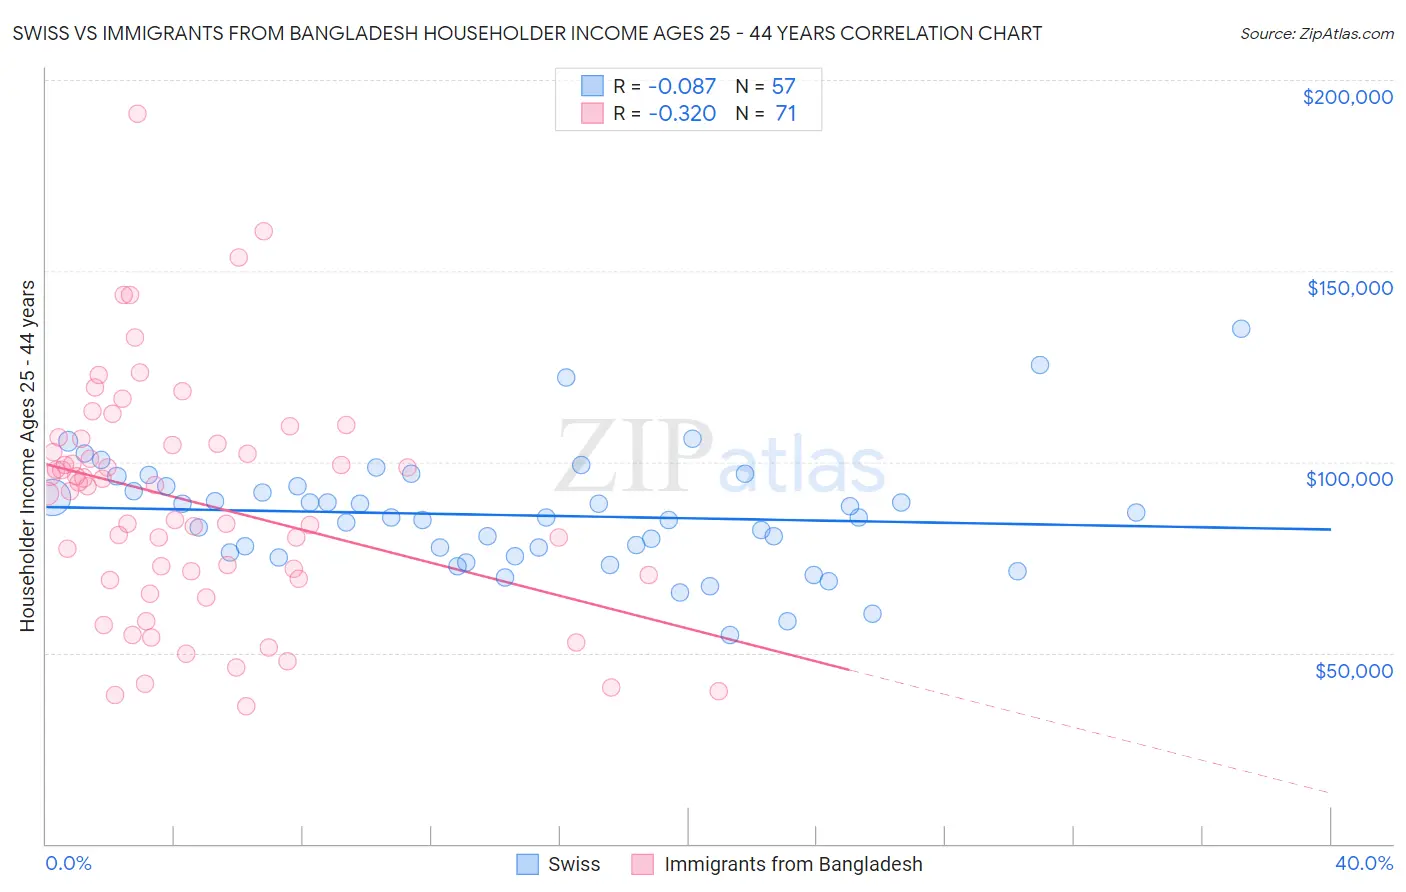 Swiss vs Immigrants from Bangladesh Householder Income Ages 25 - 44 years